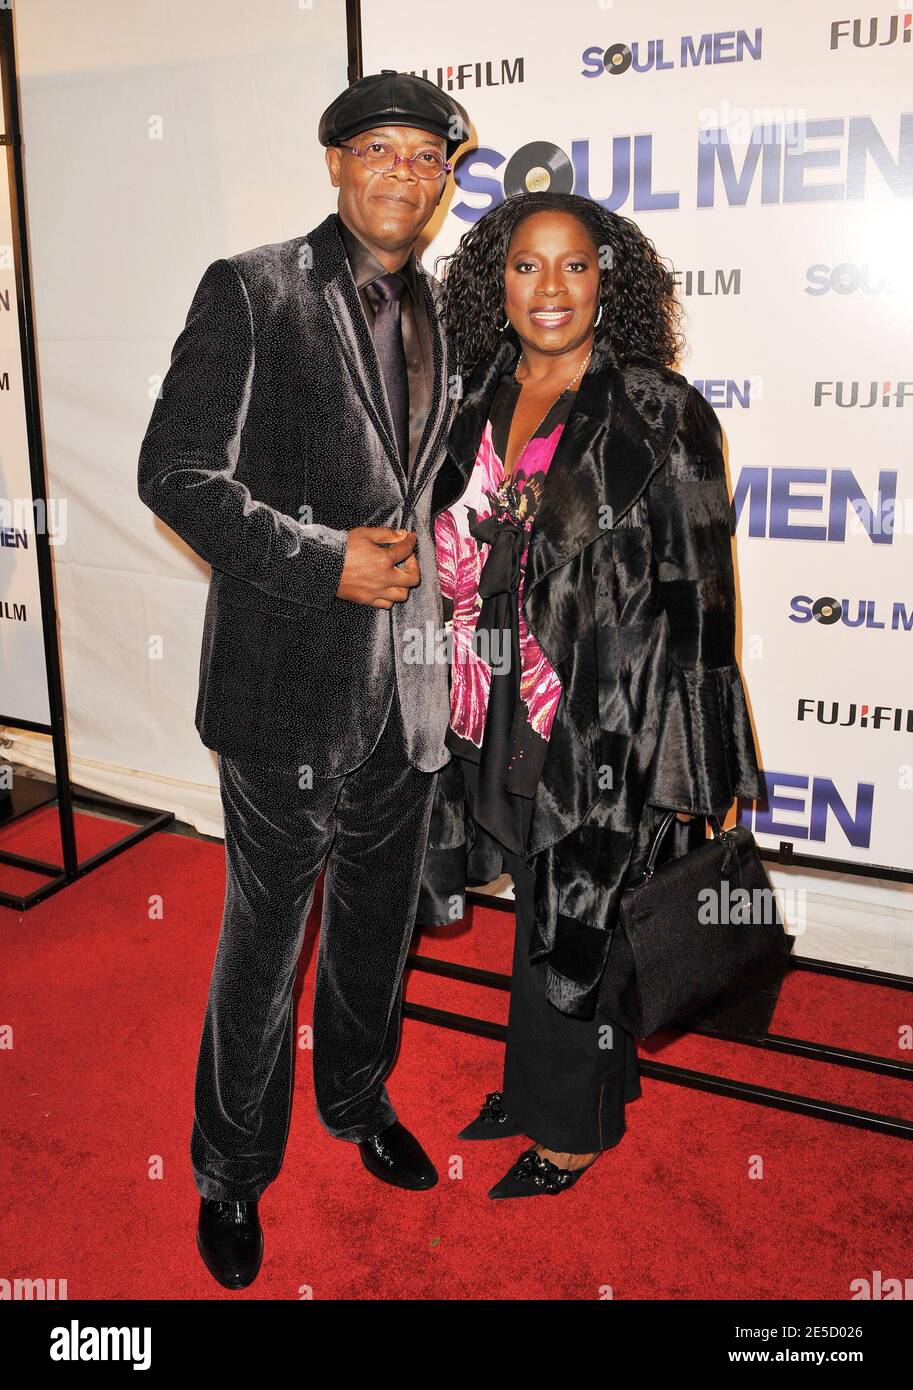 'Actor Samuel L. Jackson and wife actress LaTania Richardson attend the ''Soul Men'' World Premiere at The Apollo Theater in Harlem, New York City, NY, USA on October 28, 2008. Photo by Slaven Vlasic/ABACAPRESS.COM' Stock Photo